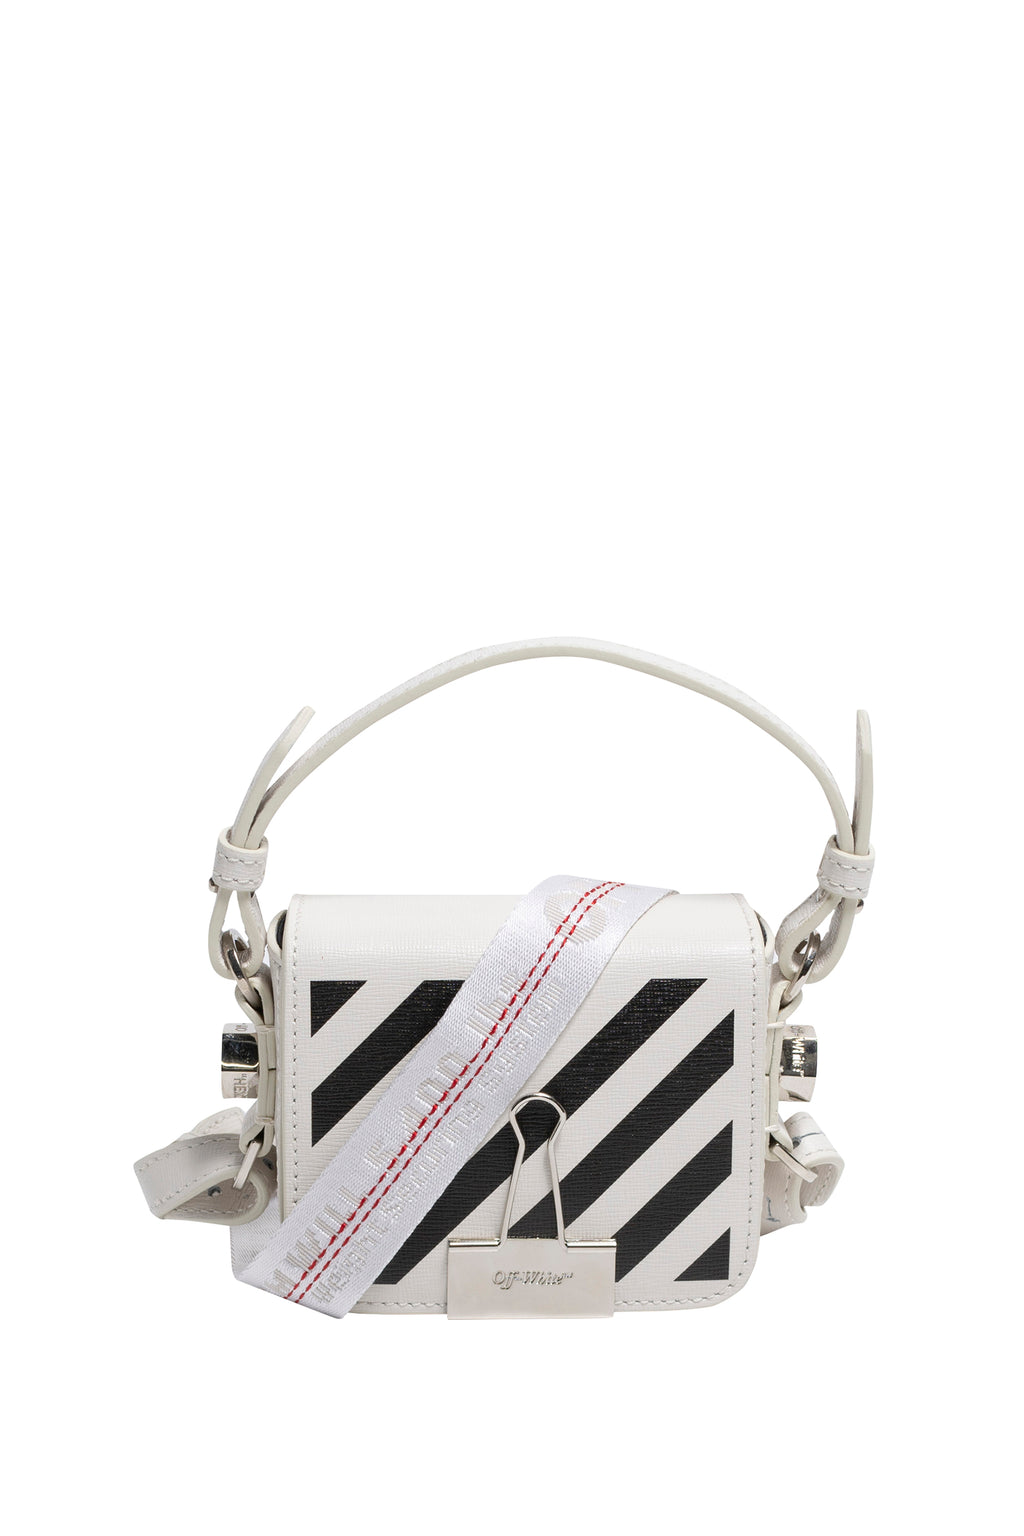 OFF-WHITE Diag Flap Bag Baby Black/Yellow in Leather with Ruthenium-tone -  GB